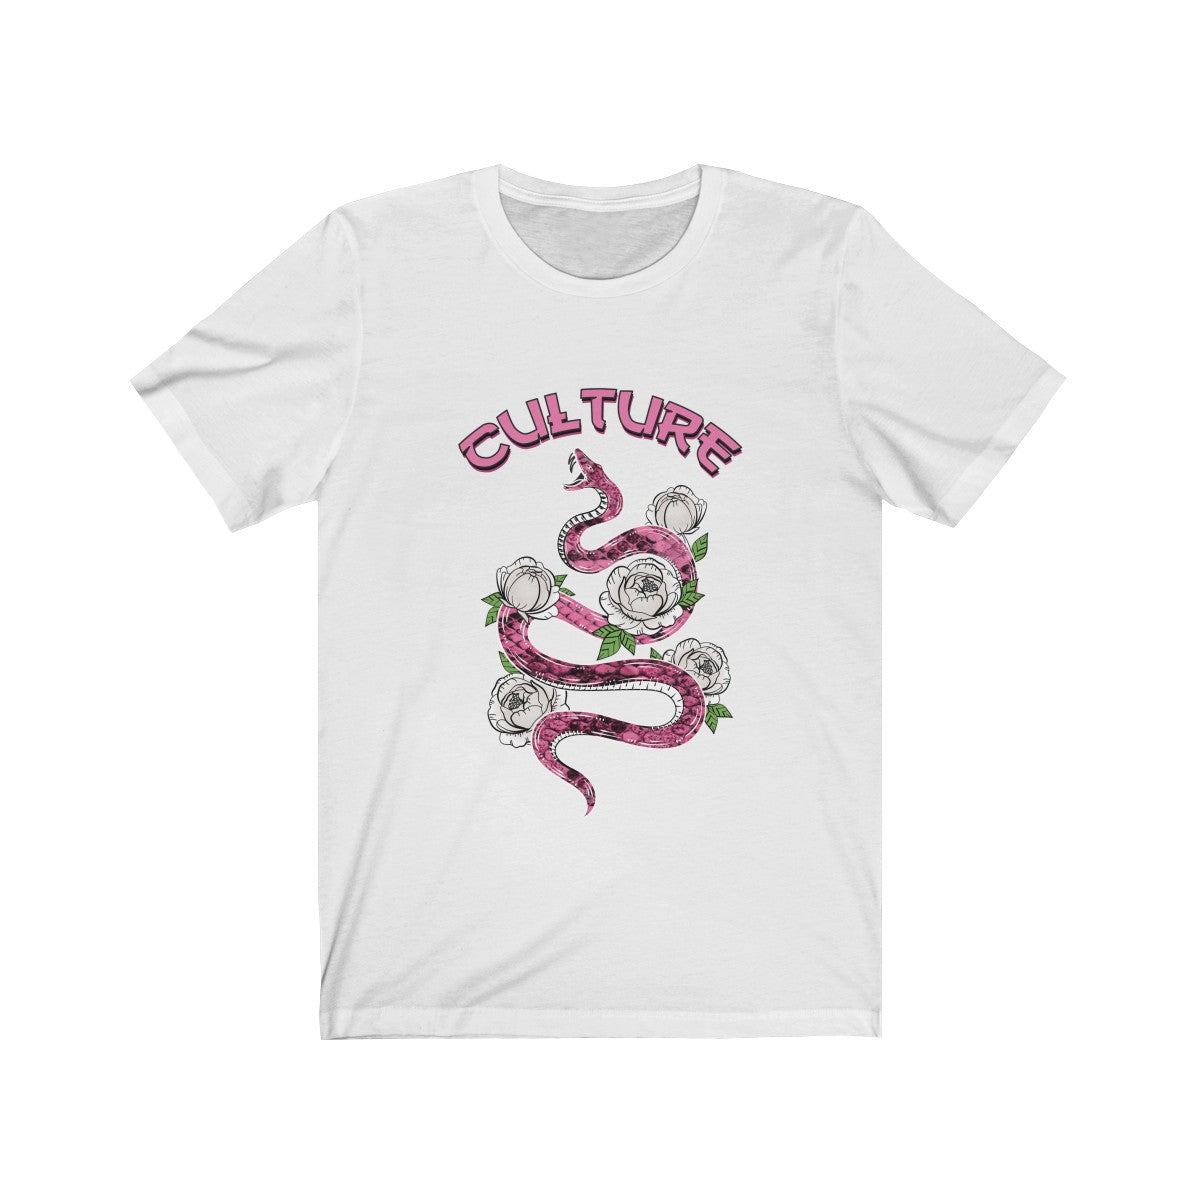 'Culture Snake' in Pink Short Sleeve Tee